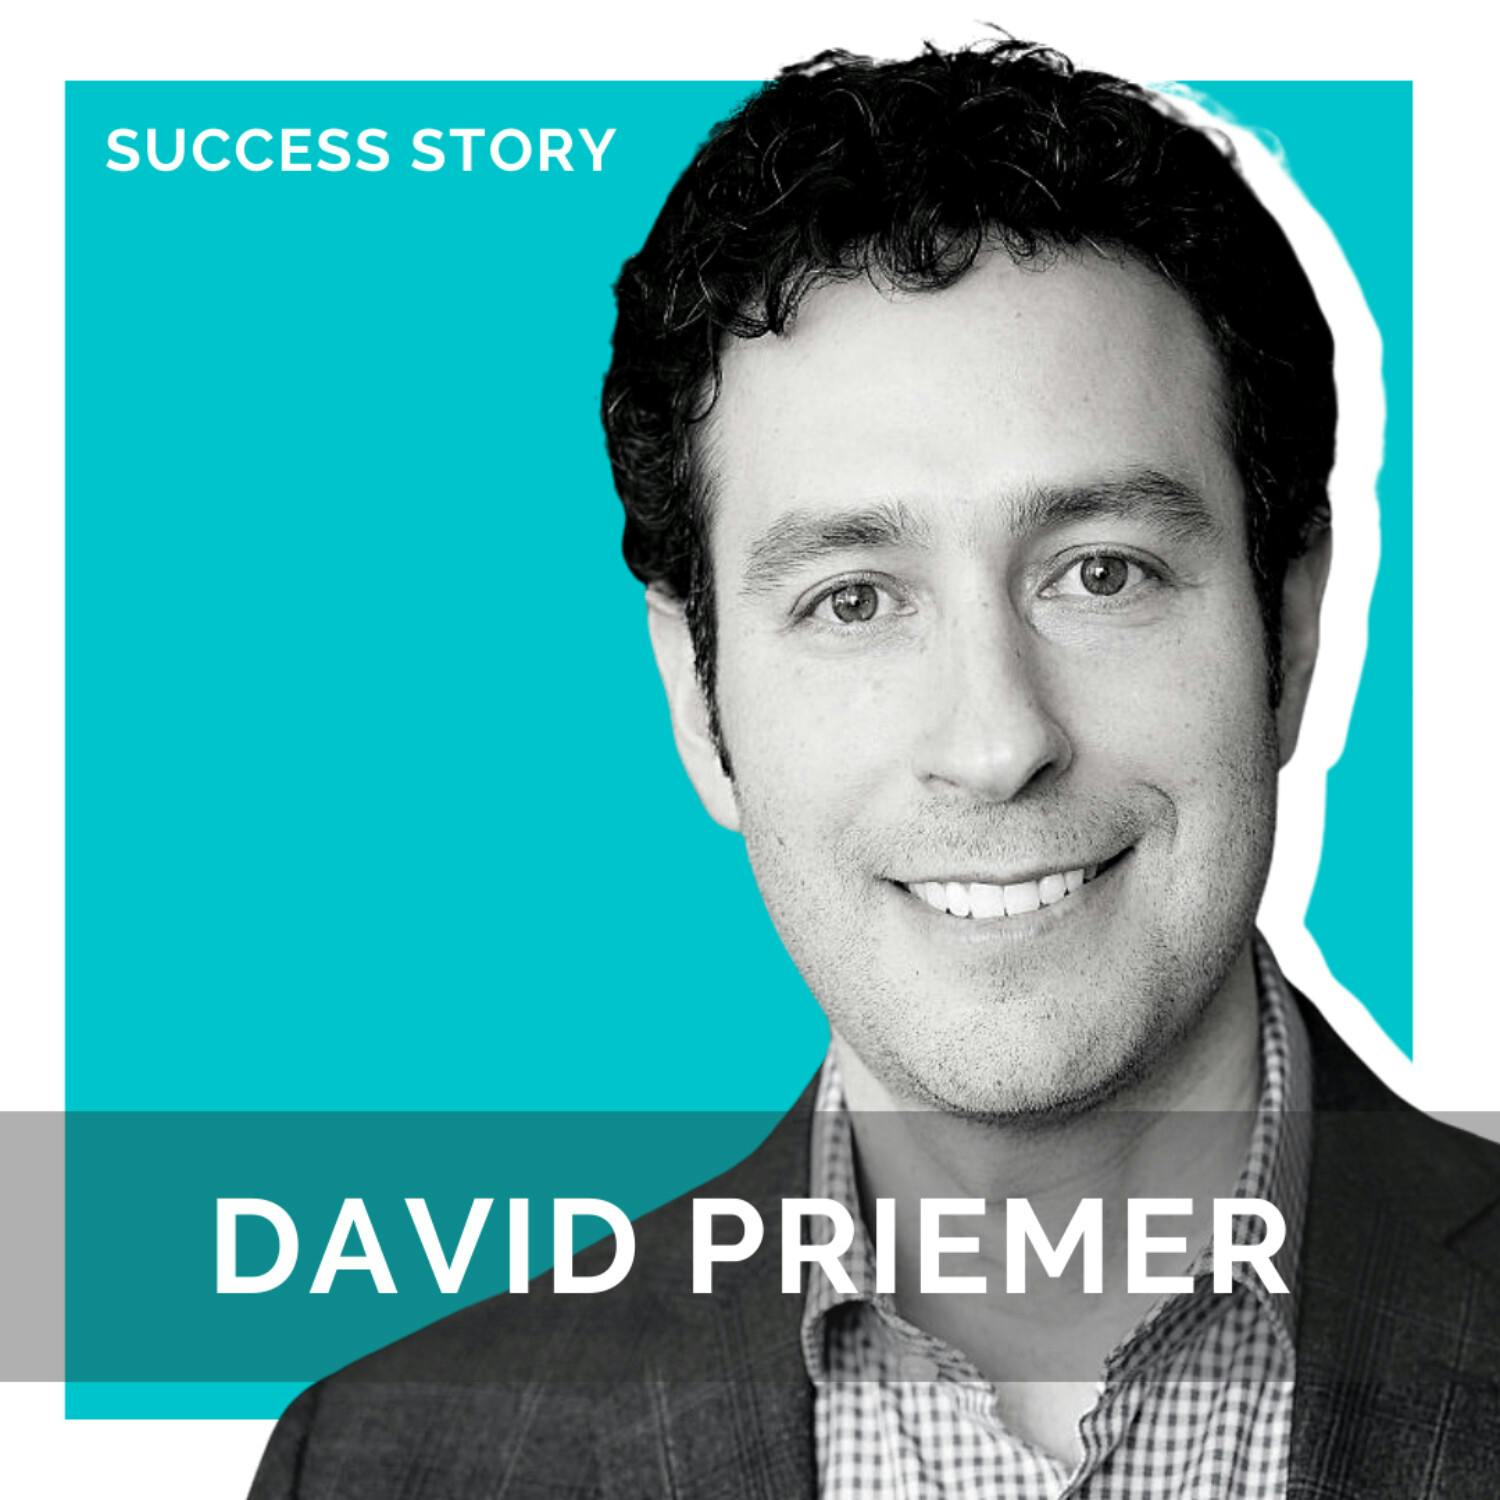 David Priemer, CEO of Cerebral Selling | How To Sell The Way You Buy